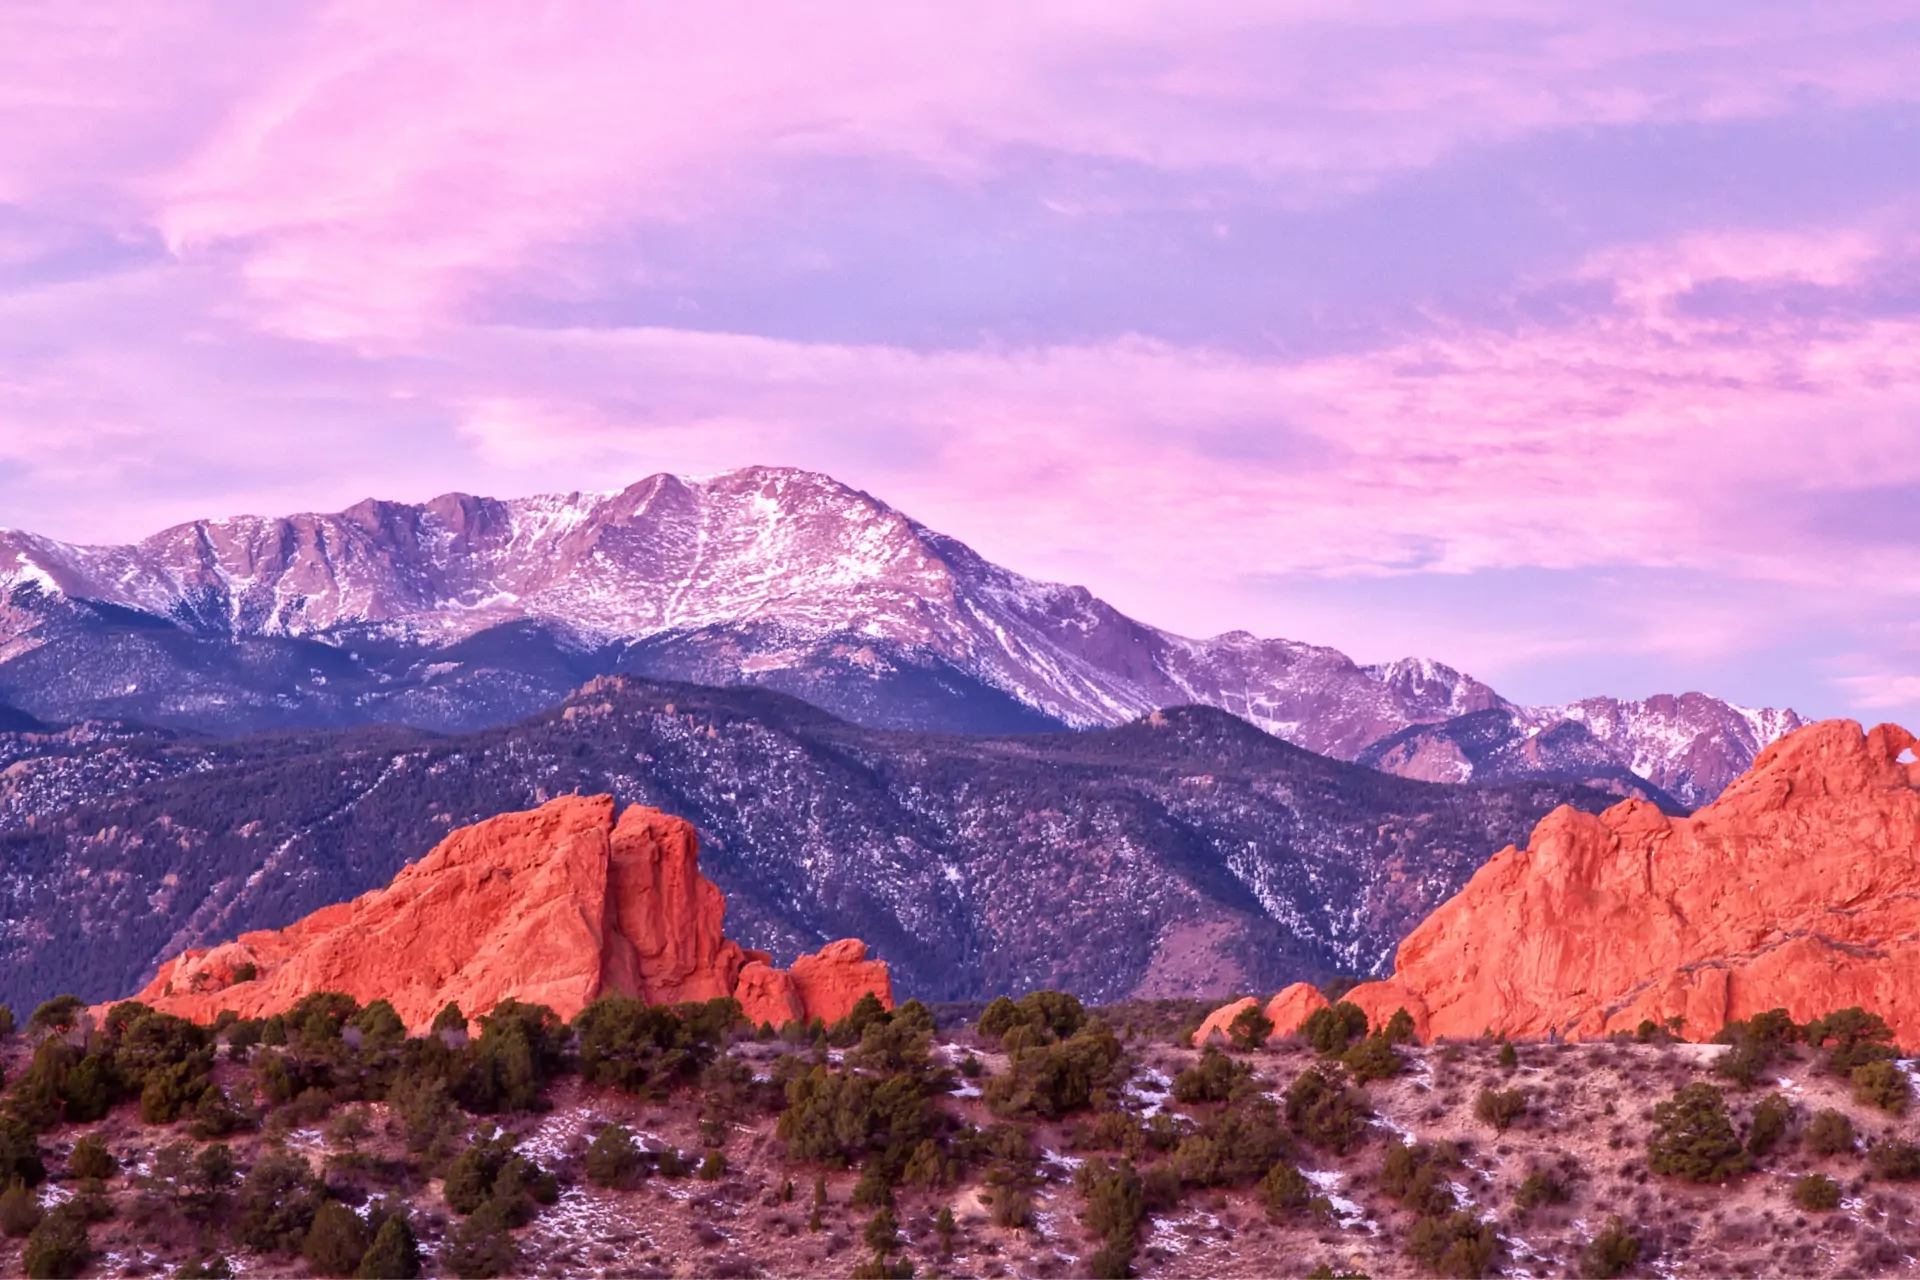 Pikes Peak Colorado is a great place to go after you get your medical marijuana card